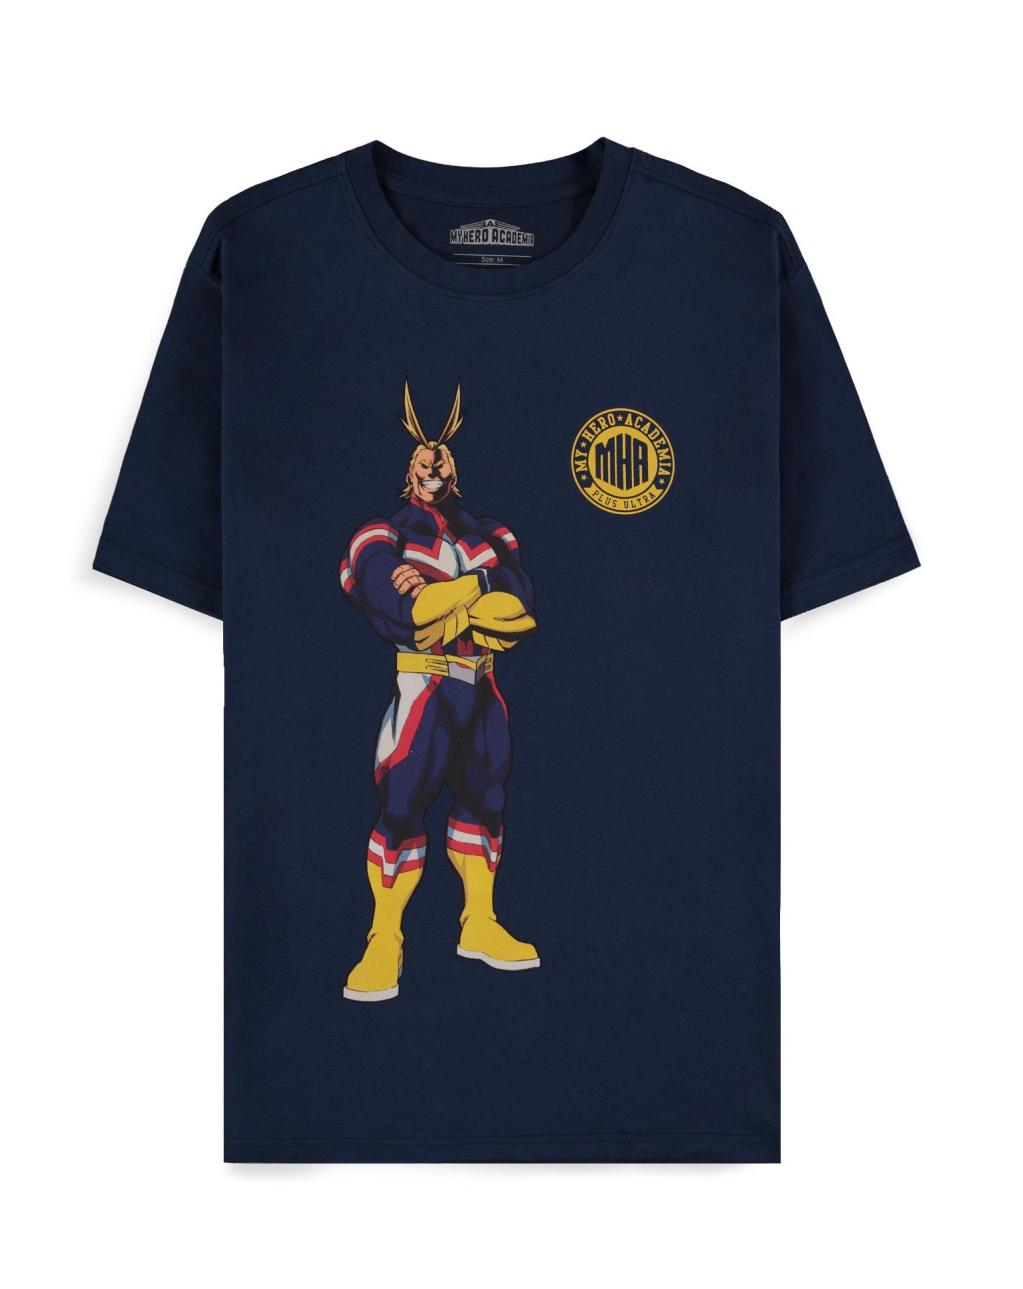 MY HERO ACADEMIA - Navy All Might Quote - Men's T-shirt (XS)